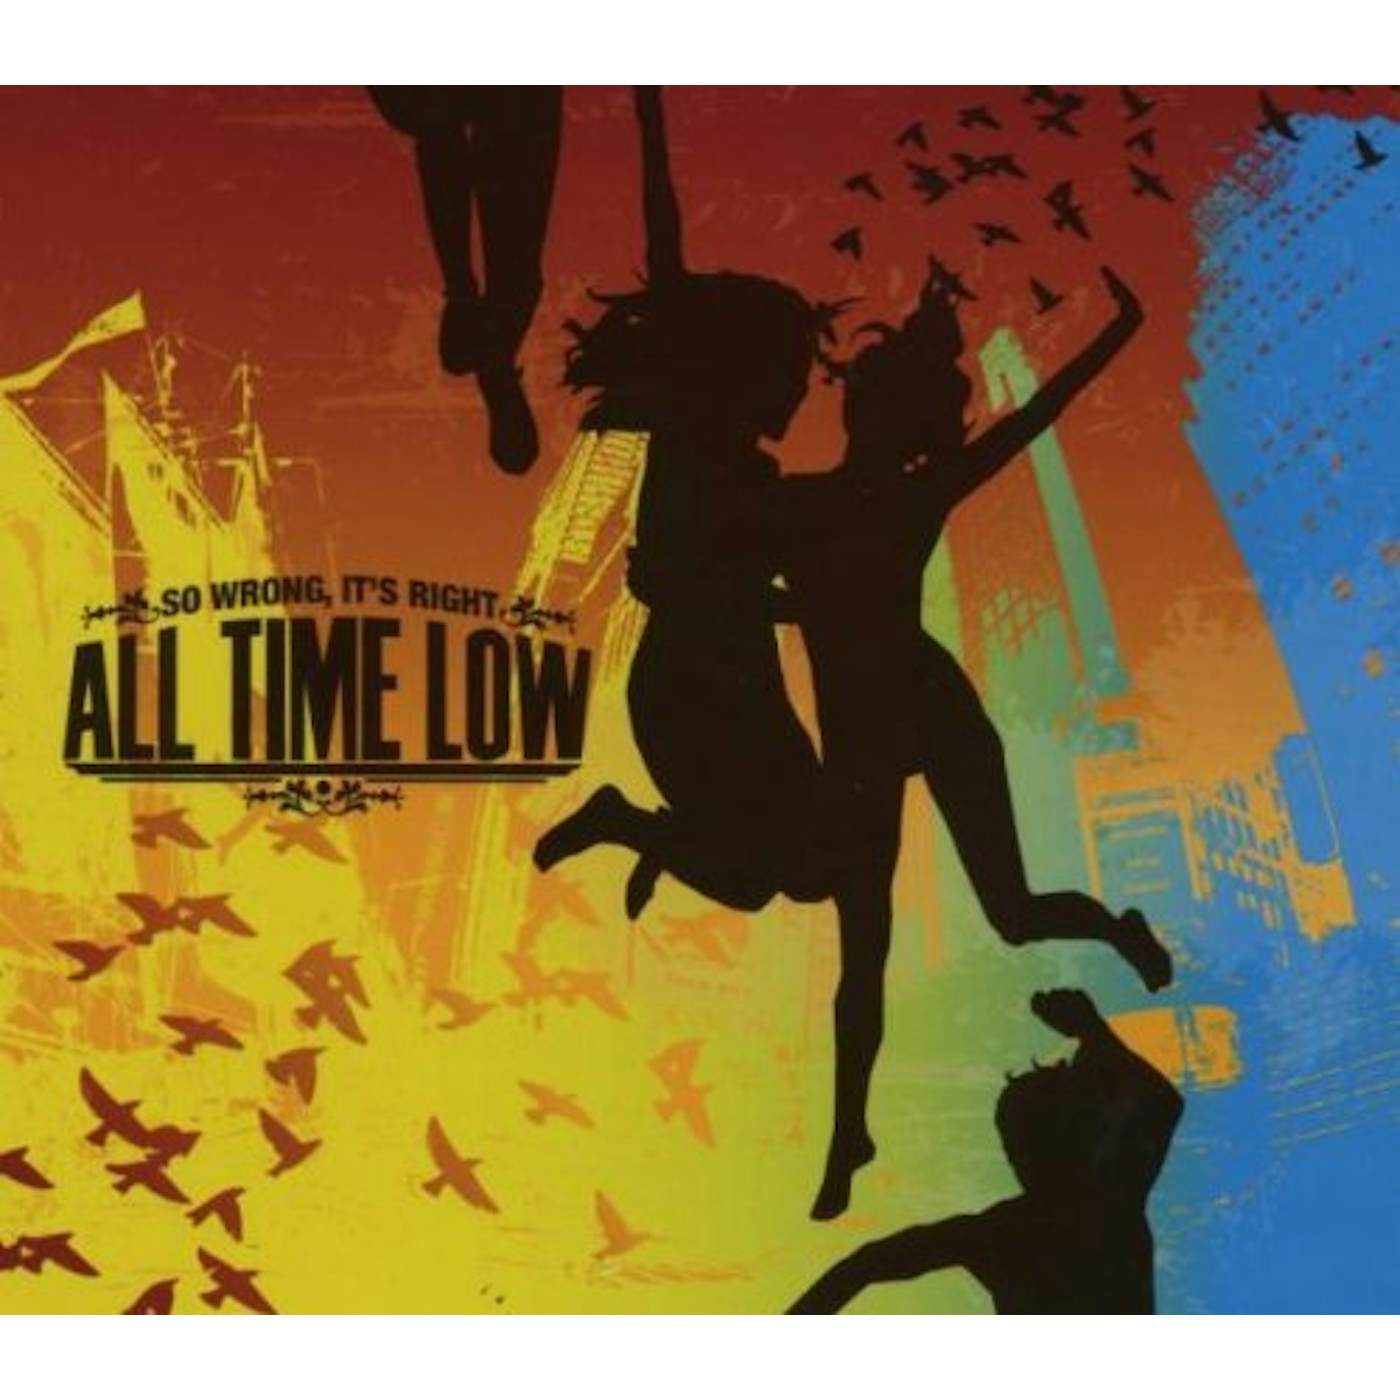 All Time Low SO WRONG IT'S RIGHT - GOLD Vinyl Record